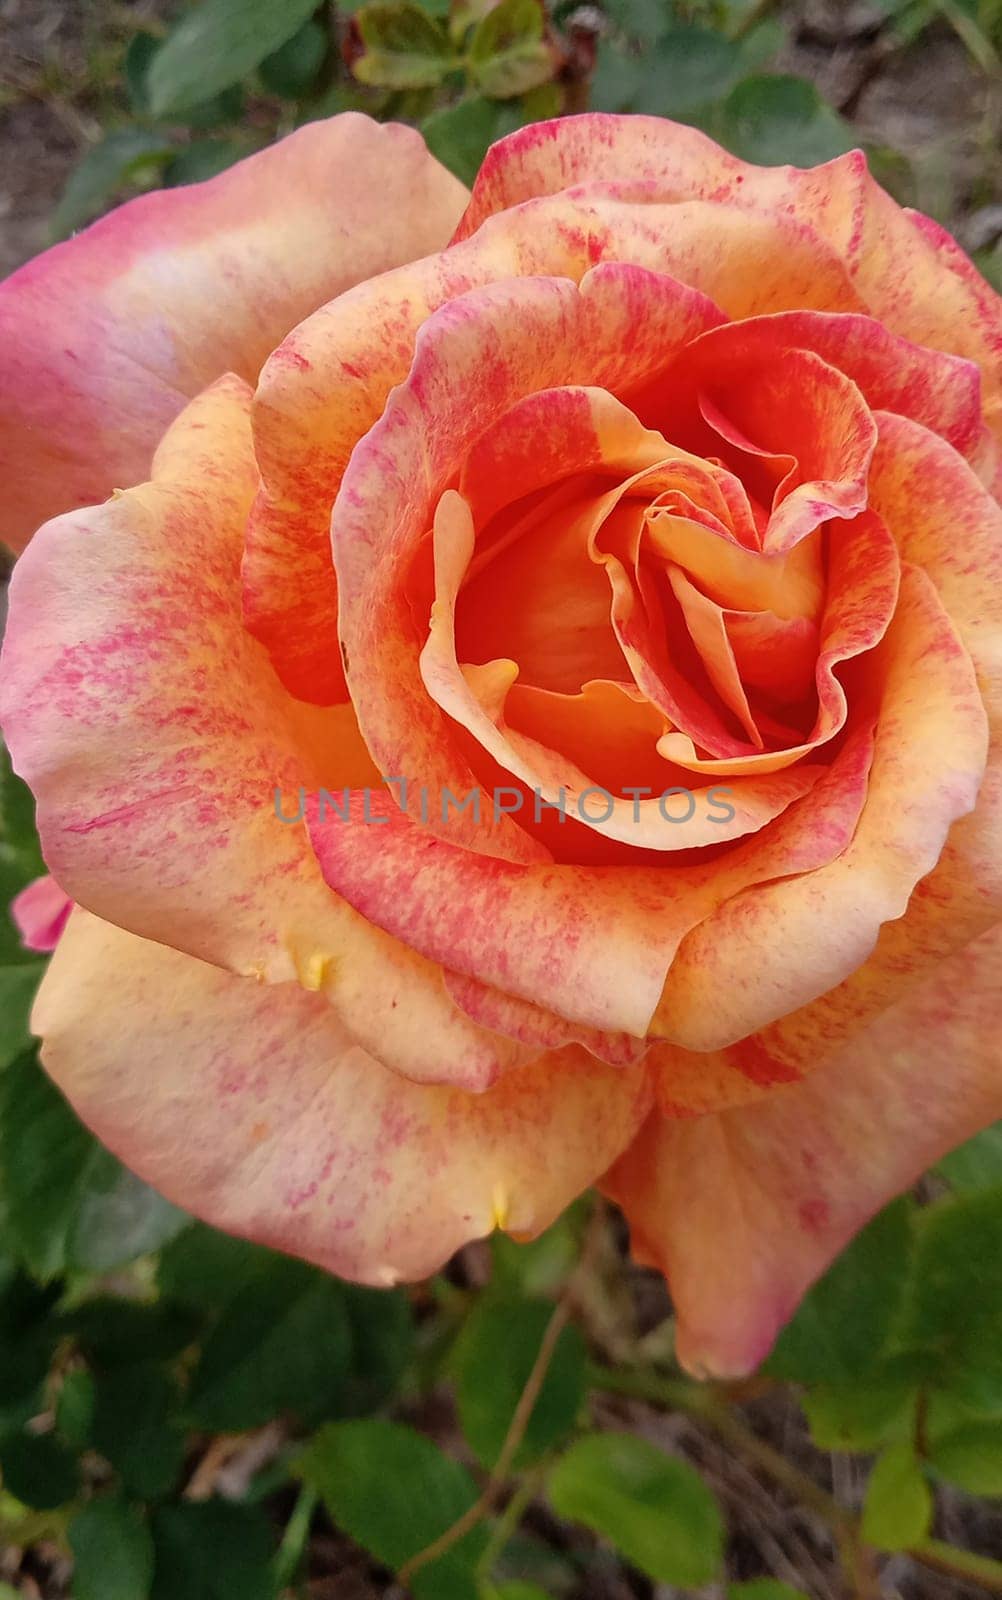 Blooming red and orange color rose in the garden. Concept for love, passion, and romance.